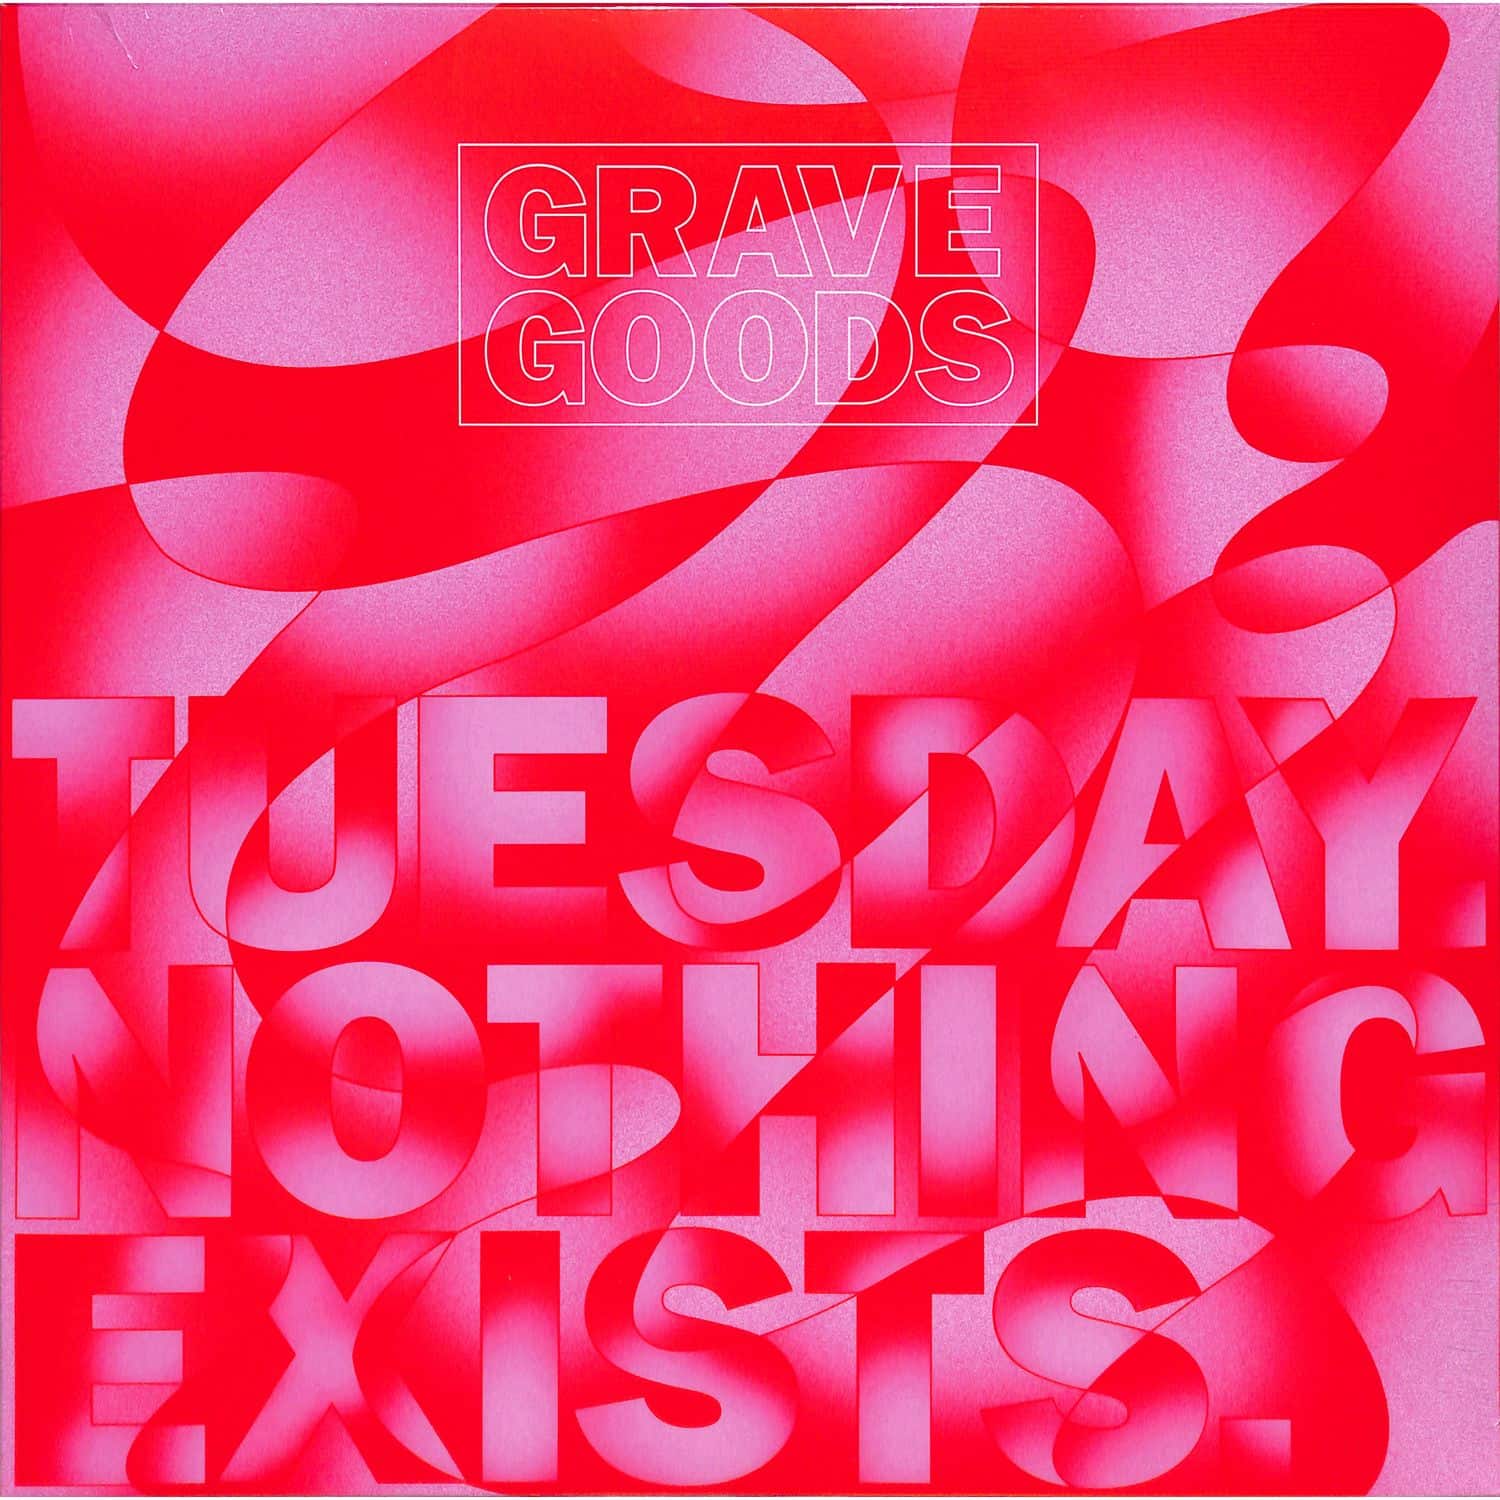 Grave Goods - TUESDAY.NOTHING EXISTS. 